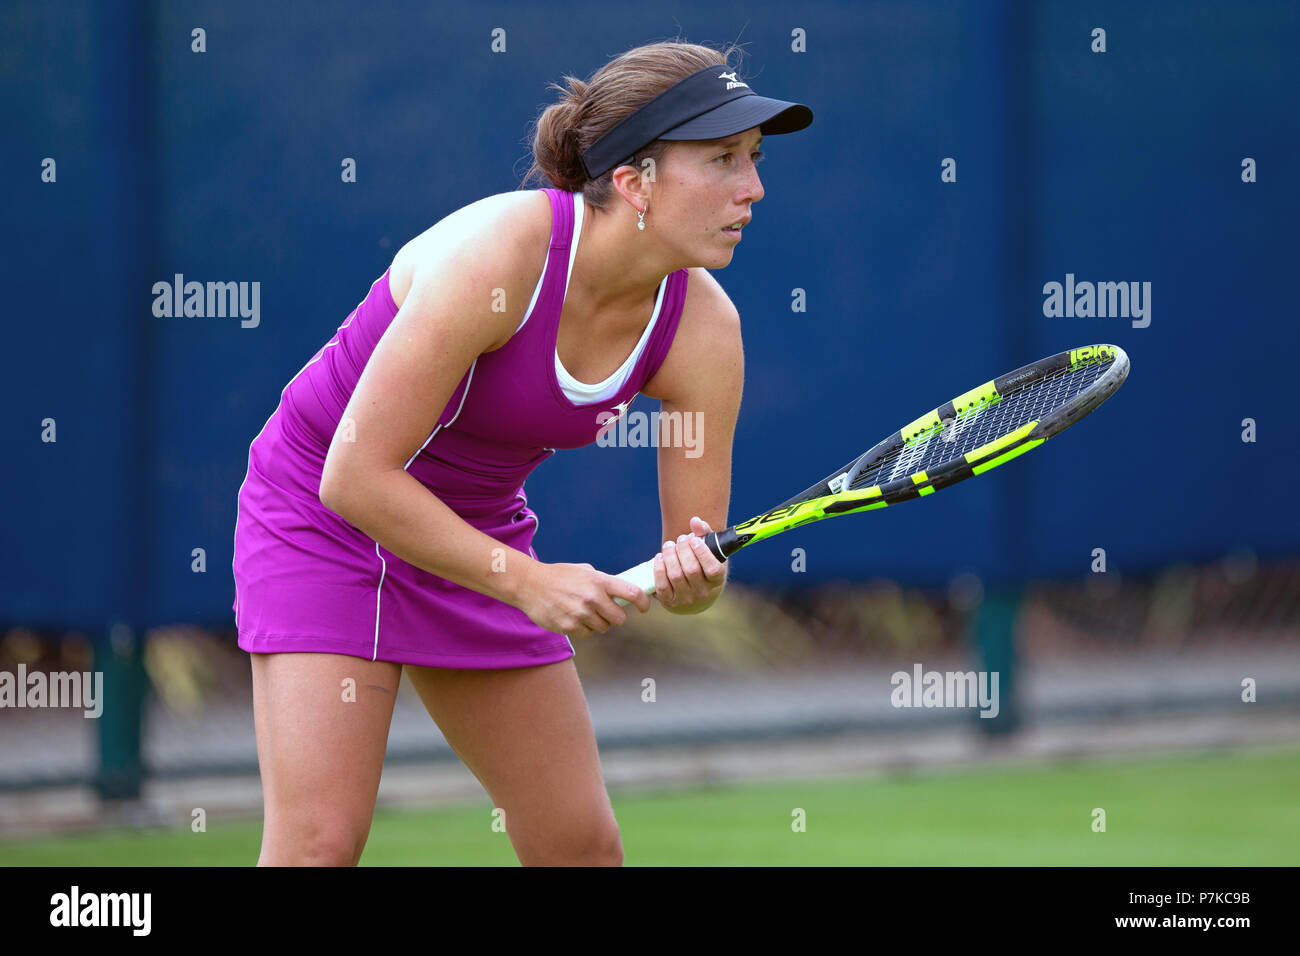 Professional tennis player Irina Falconi awaits a tennis serve in the ready position during a match in 2018. Stock Photo